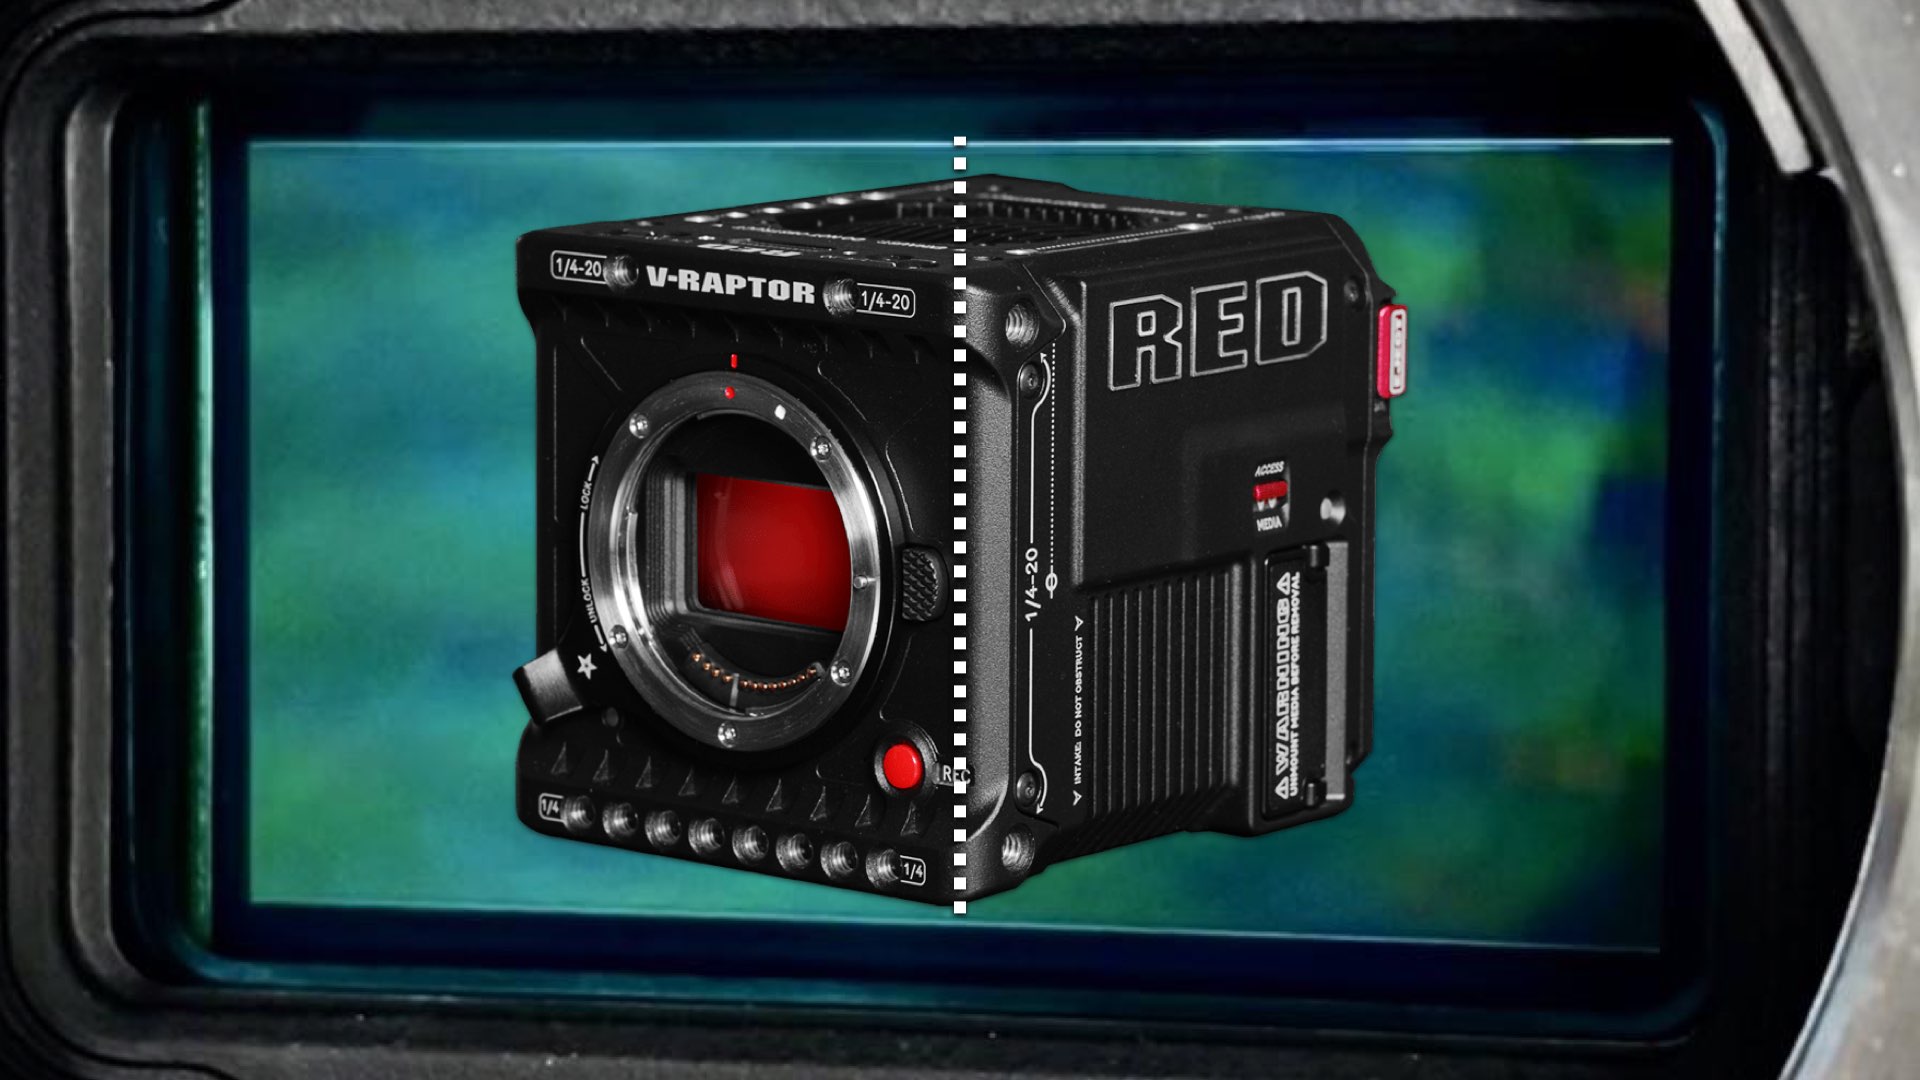 RED has Created “Behind-the-lens mitigation” for Raptor’s Stitched Sensor